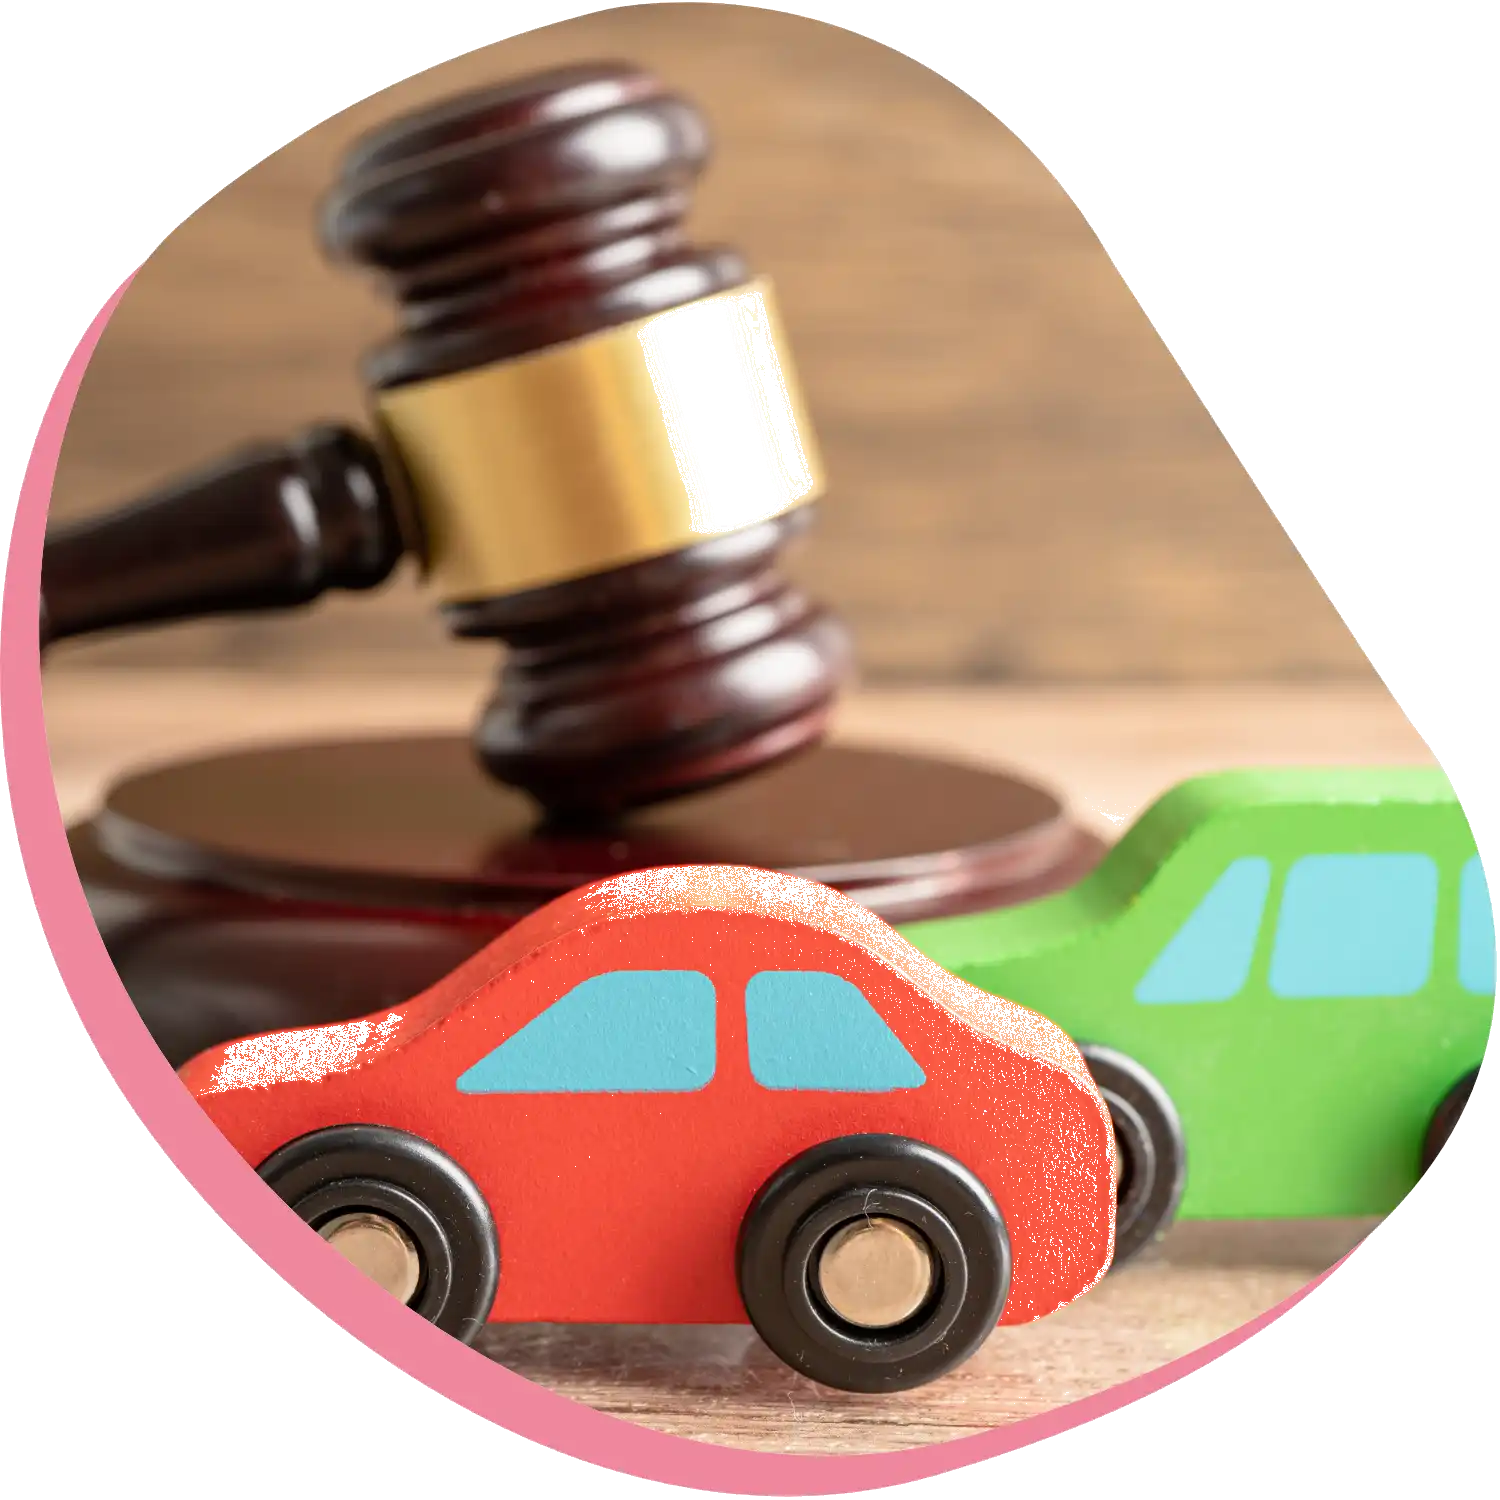 Who Do You Sue in a Car Accident Lawsuit? - If you're in a car accident, and it wasn't your fault, you will likely need to sue the other driver or your own insurance.